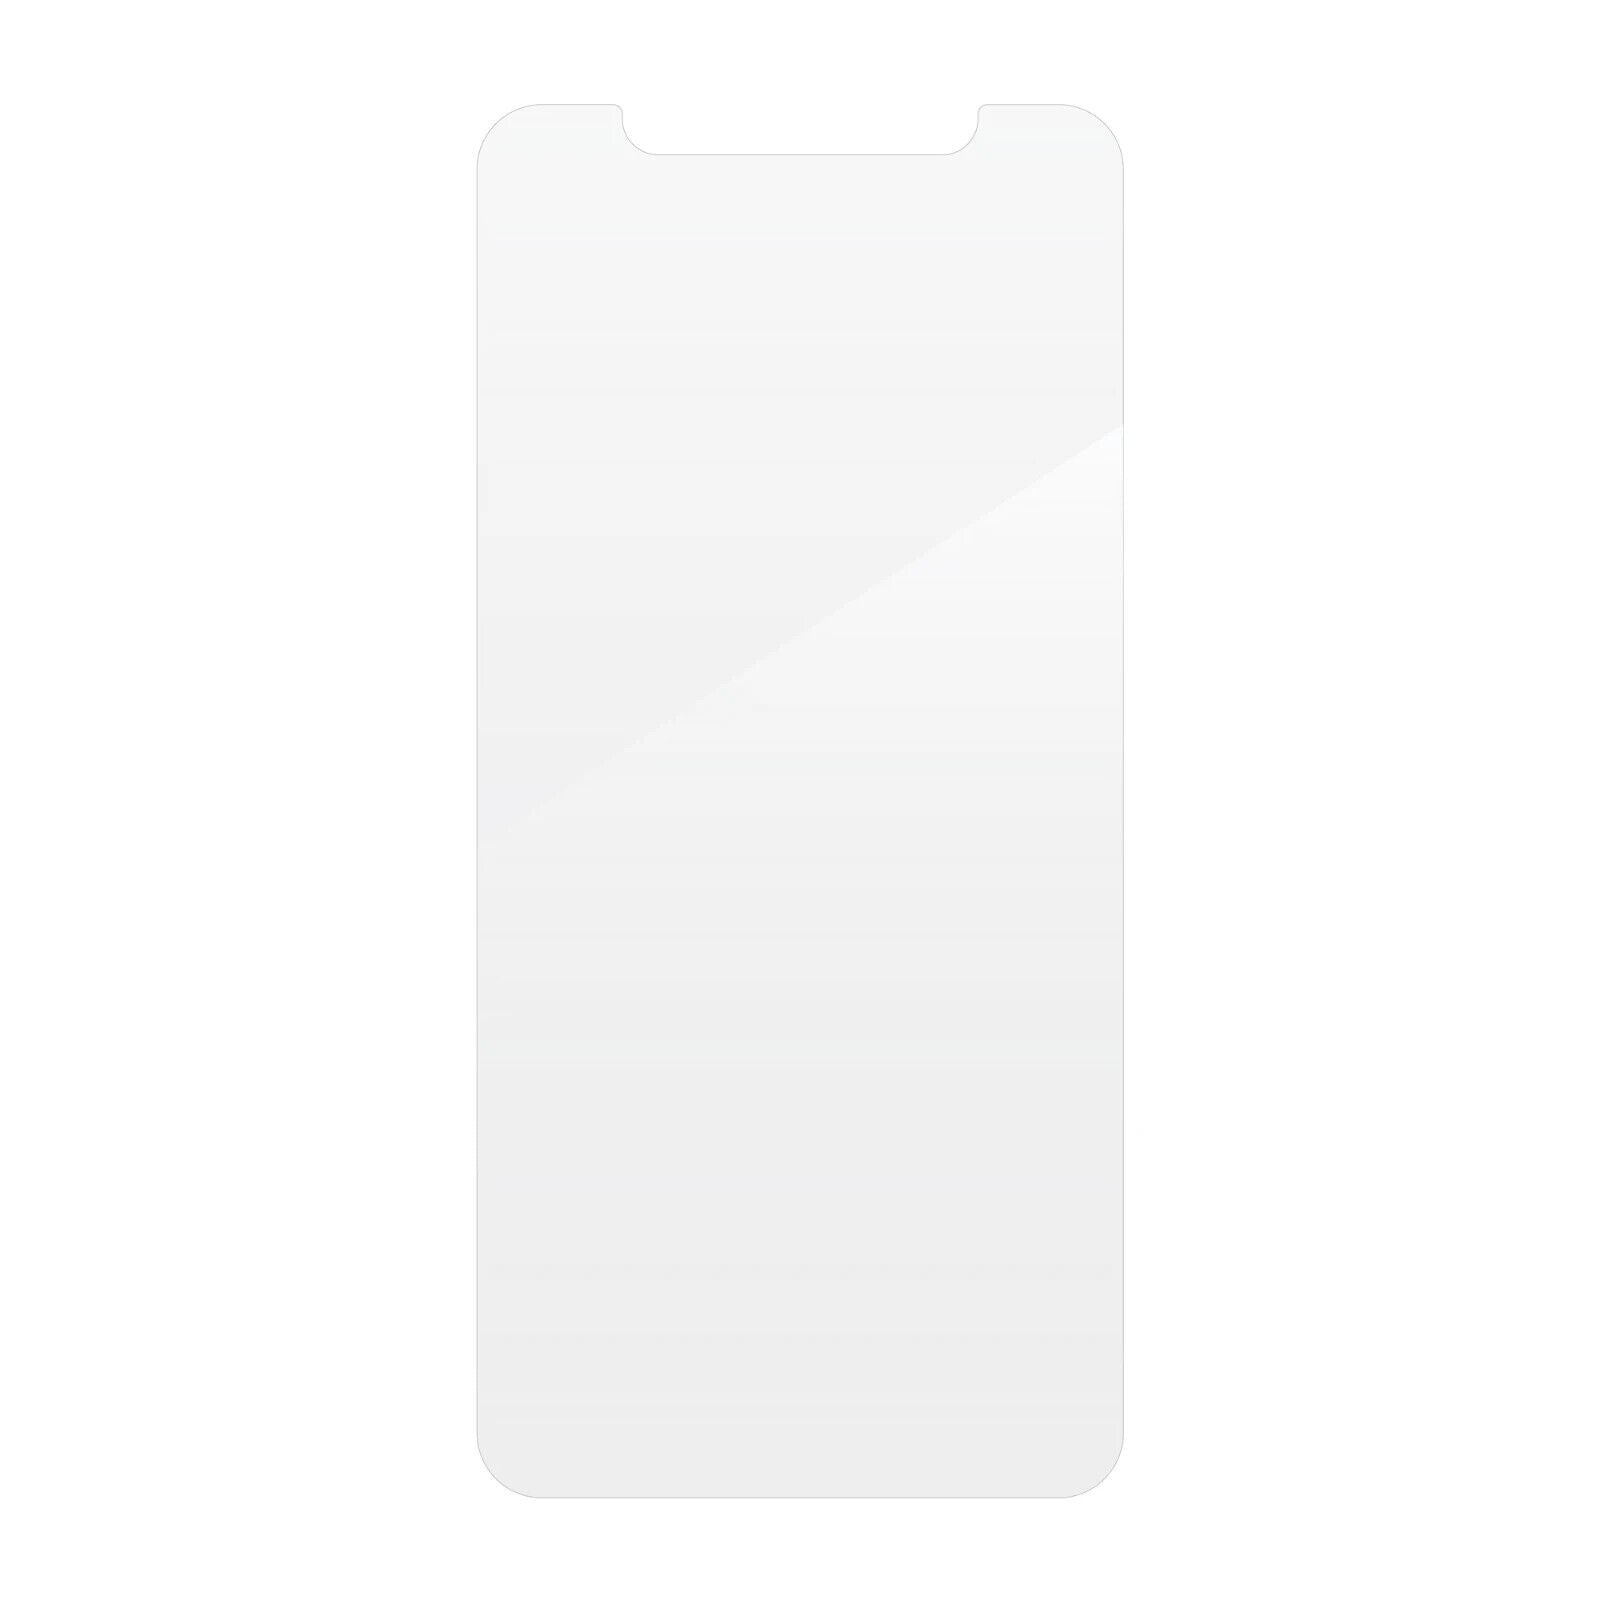 ZAGG InvisibleShield Hybrid Screen Protector for iPhone 12 PRO MAX 6.7" - Clear